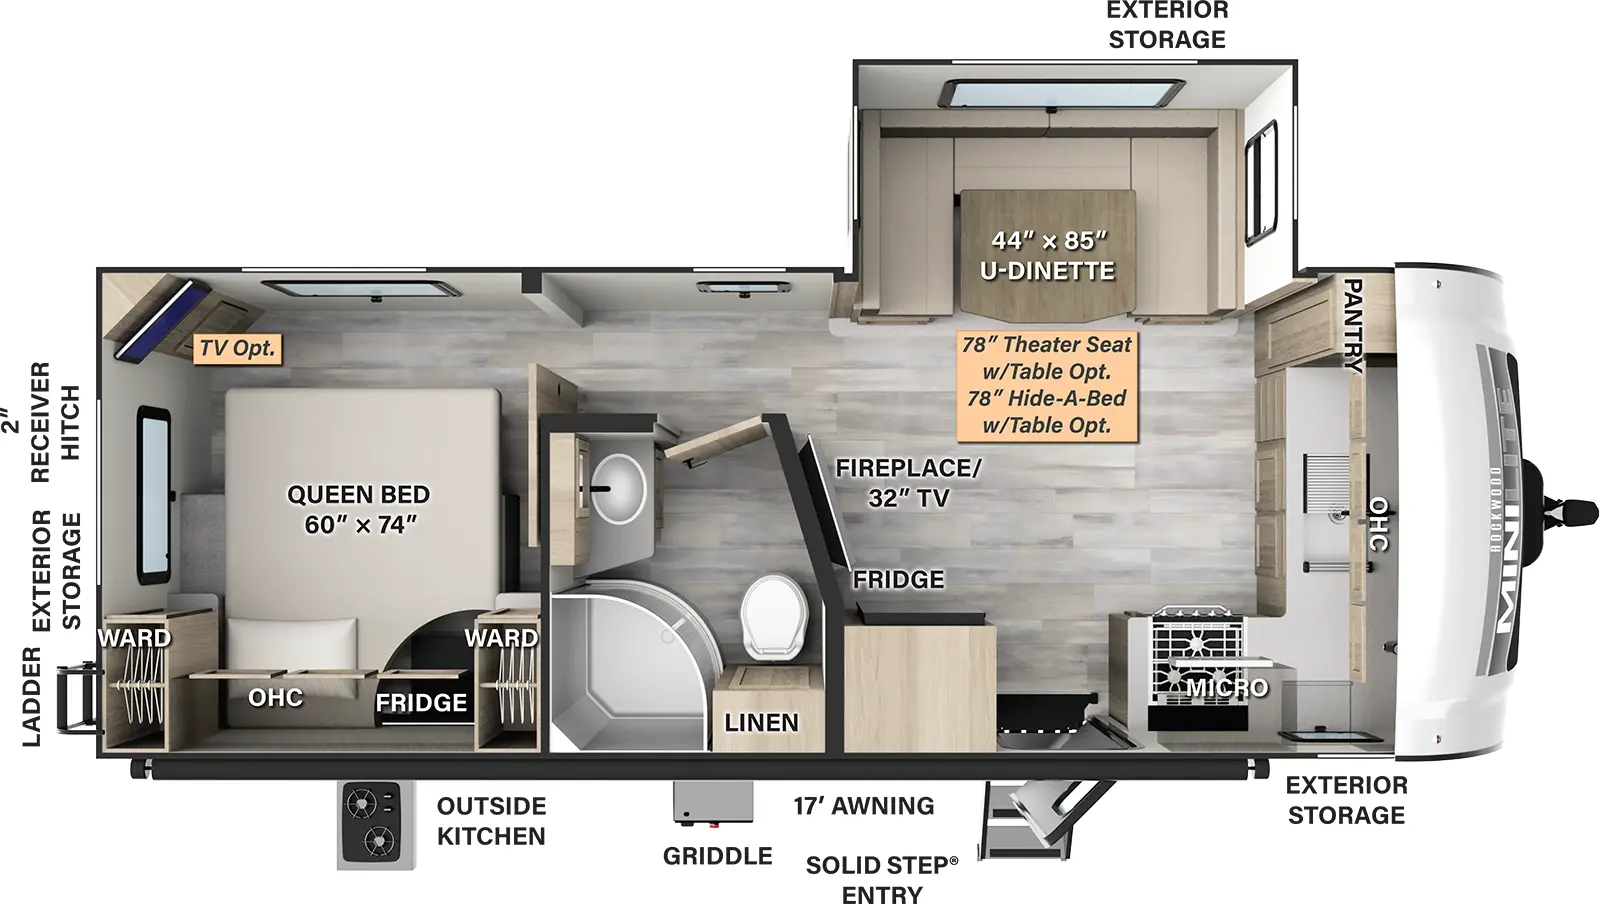 The 2506S has one slide out and one entry door. Exterior features a 17 foot awning, solid entry step, outside kitchen with refrigerator, front exterior storage on both sides, griddle, rear exterior storage, rear ladder, and 2 inch receiver hitch. Interior layout front to back: front kitchen with pantry, kitchen counter with sink and overhead cabinet wrap to door side with cooktop, microwave, entry door and refrigerator; angled TV and fireplace along inner wall; off-door side slide out with u-dinette (theater seating with table or hide-a-bed with table optional); door side full bathroom with linen closet; rear bedroom with side facing queen bed, overhead cabinets, and wardrobes on either side (optional TV). 